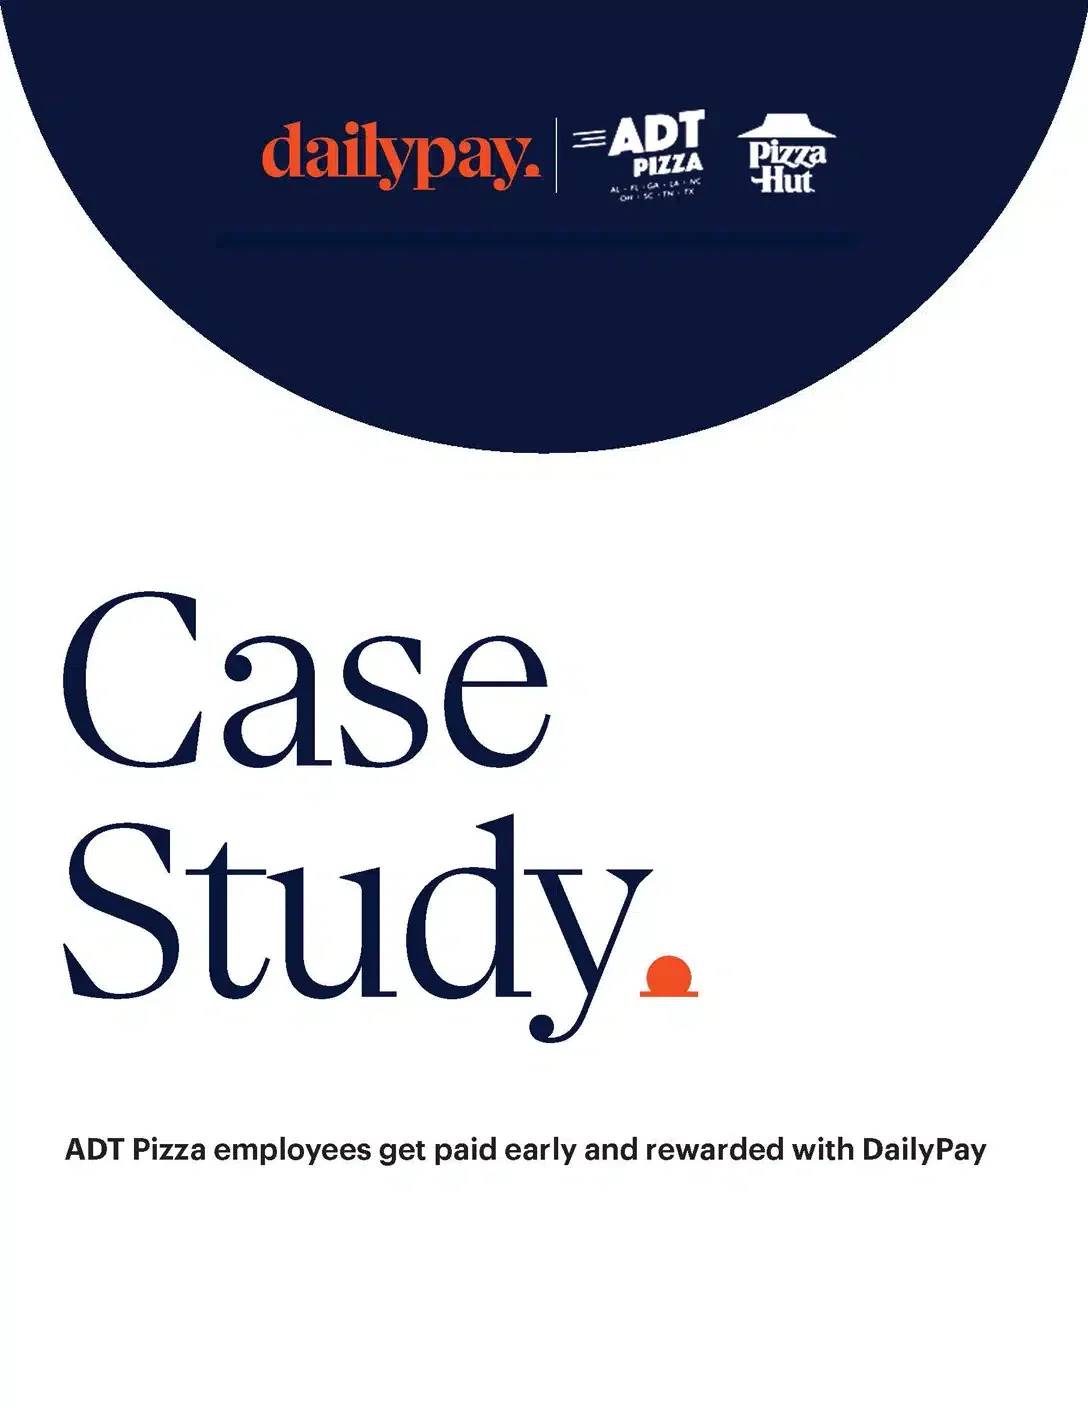 Case Study: ADT Pizza employees get paid early and rewarded with DailyPay. Logos of DailyPay, ADT Pizza, and Pizza Hut are at the top.